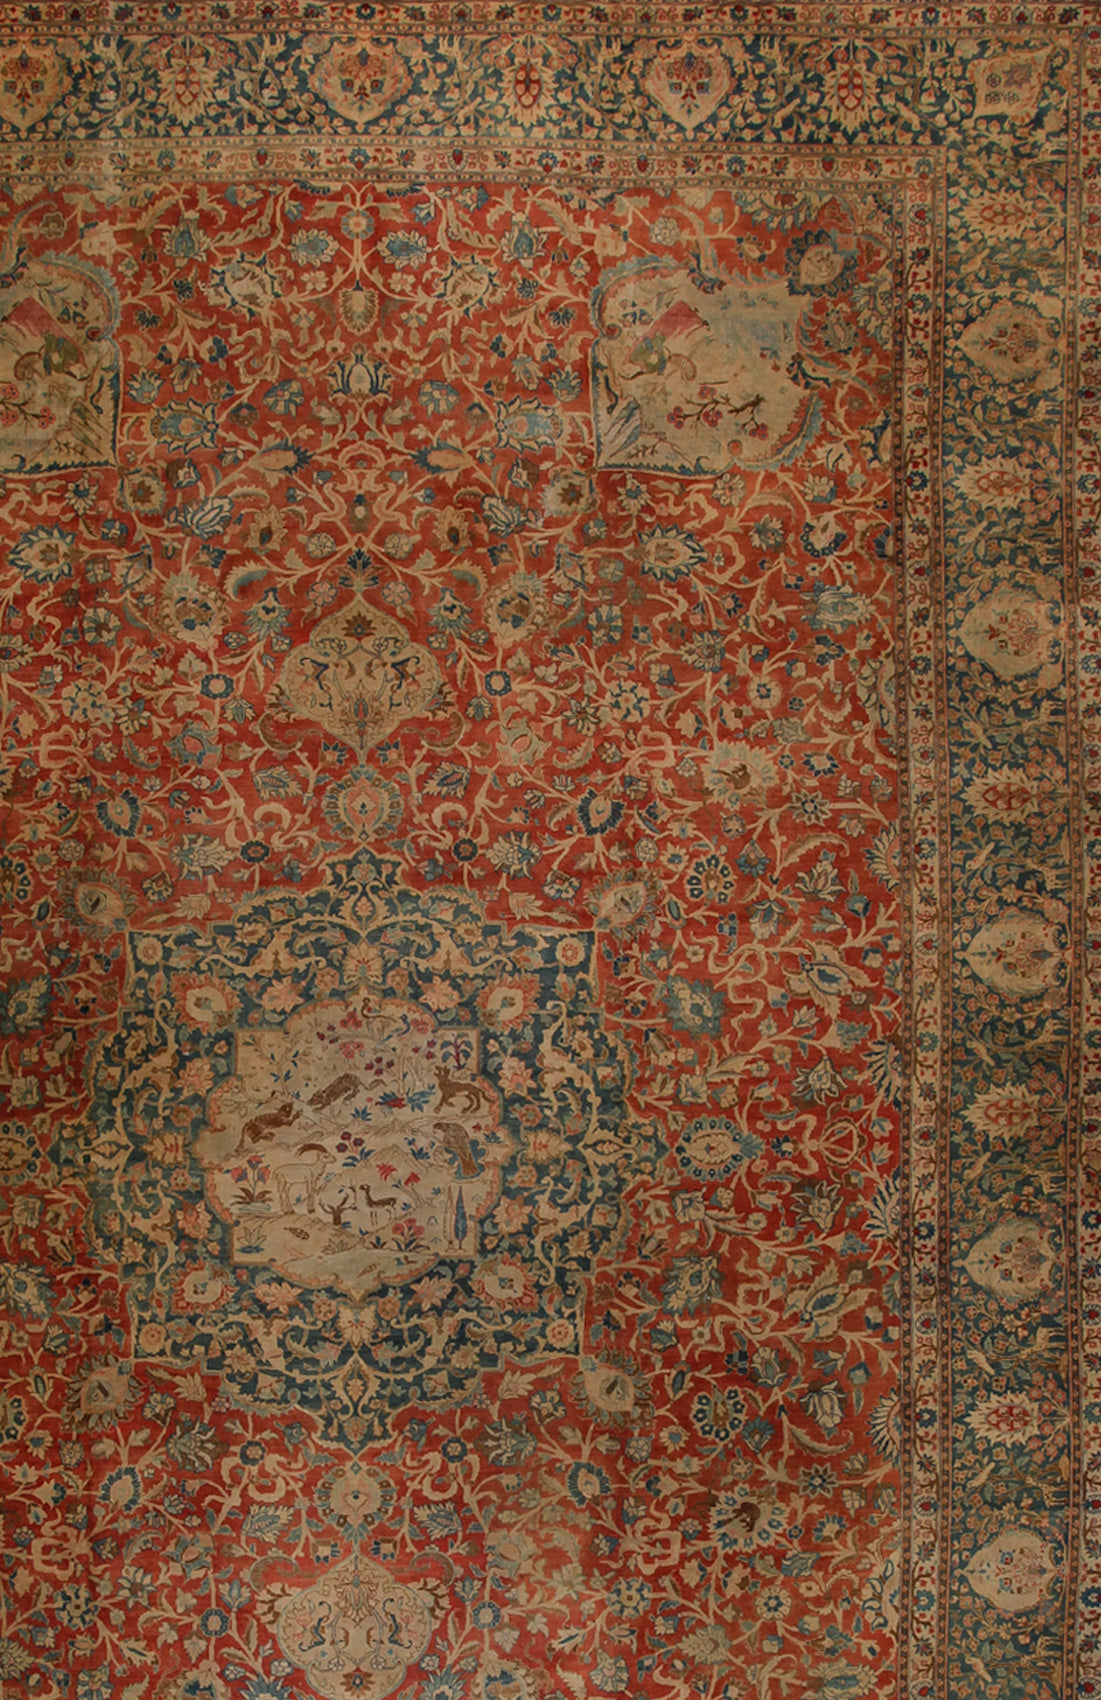 Top right corner is the frame of the rug showing climbing plants as pattern.